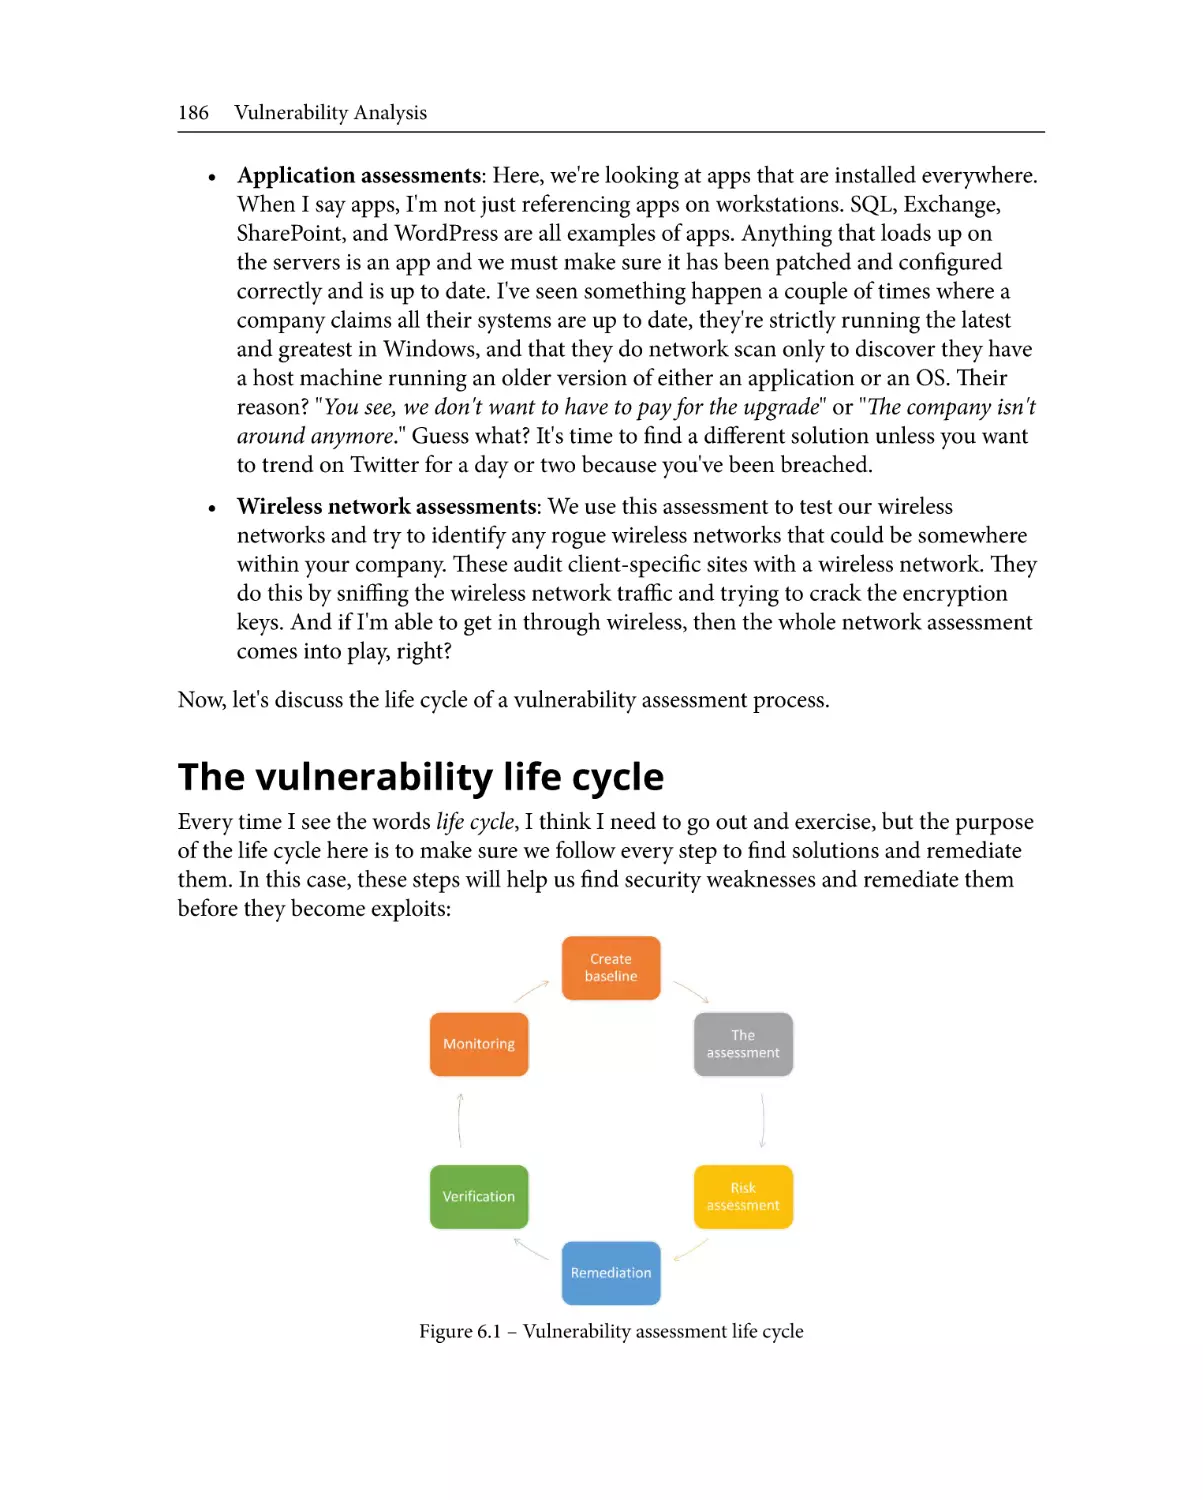 The vulnerability life cycle